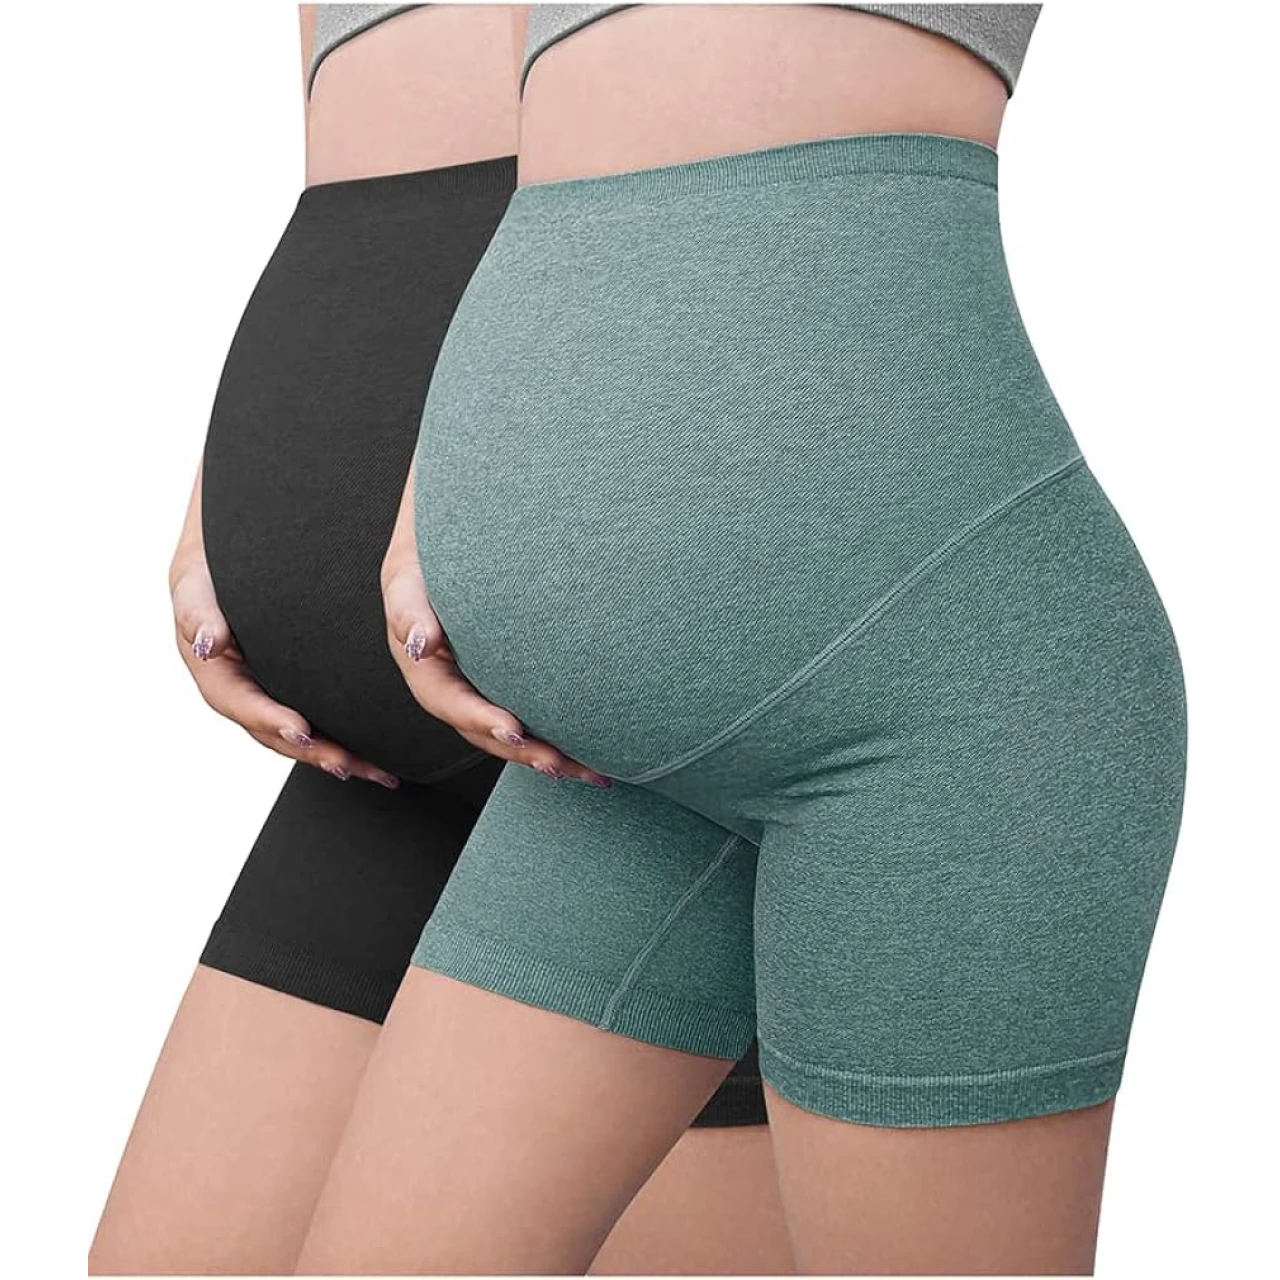 OQQ Women&rsquo;s 2-Pack Maternity Athletic Shorts Over The Belly Bump Seamless Active Yoga Leggings